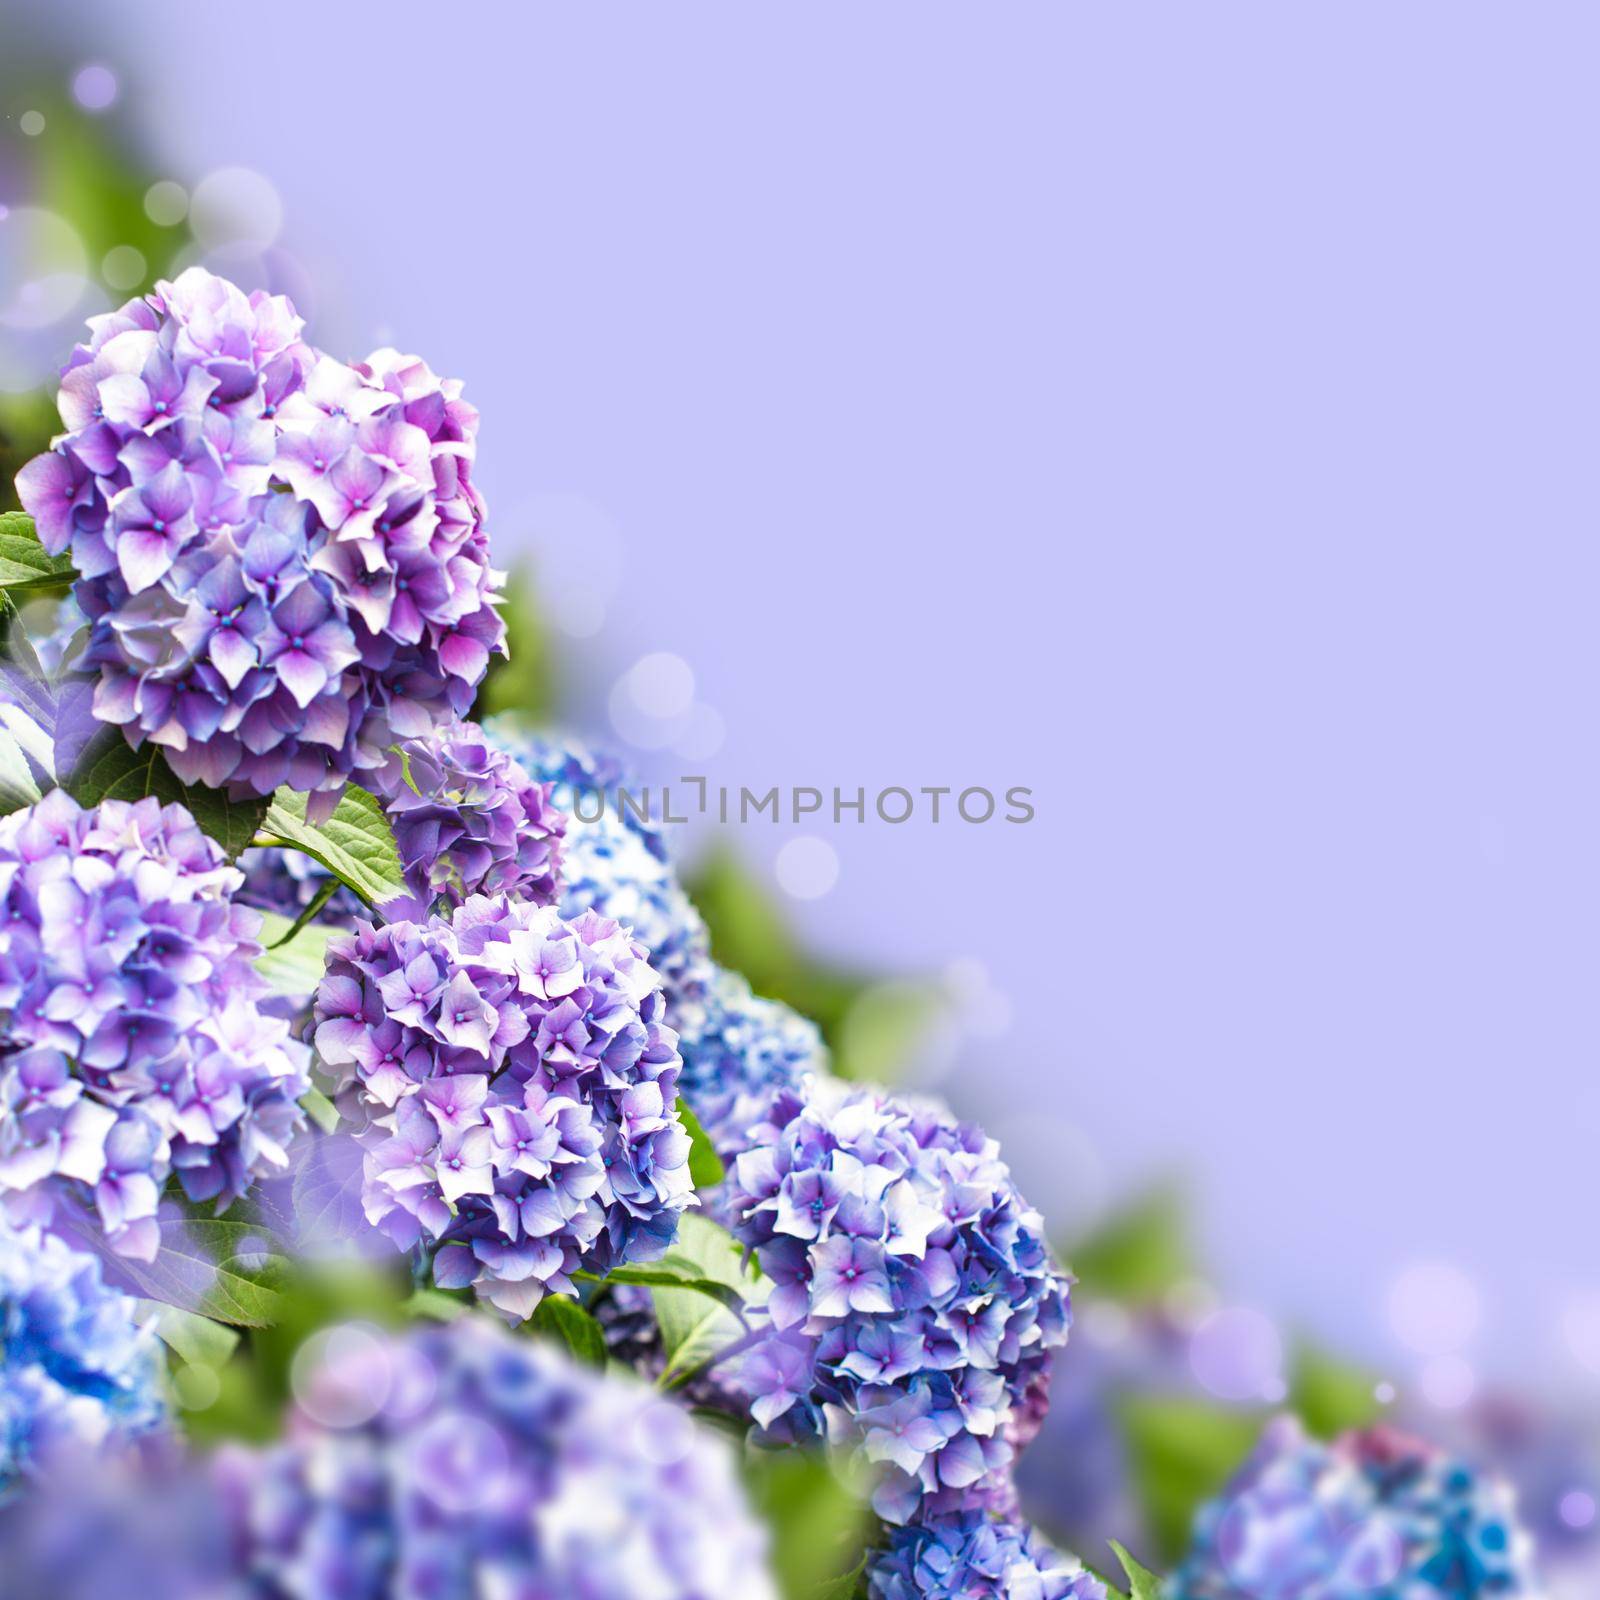 Hydrangea flowers with green leaves over purple background